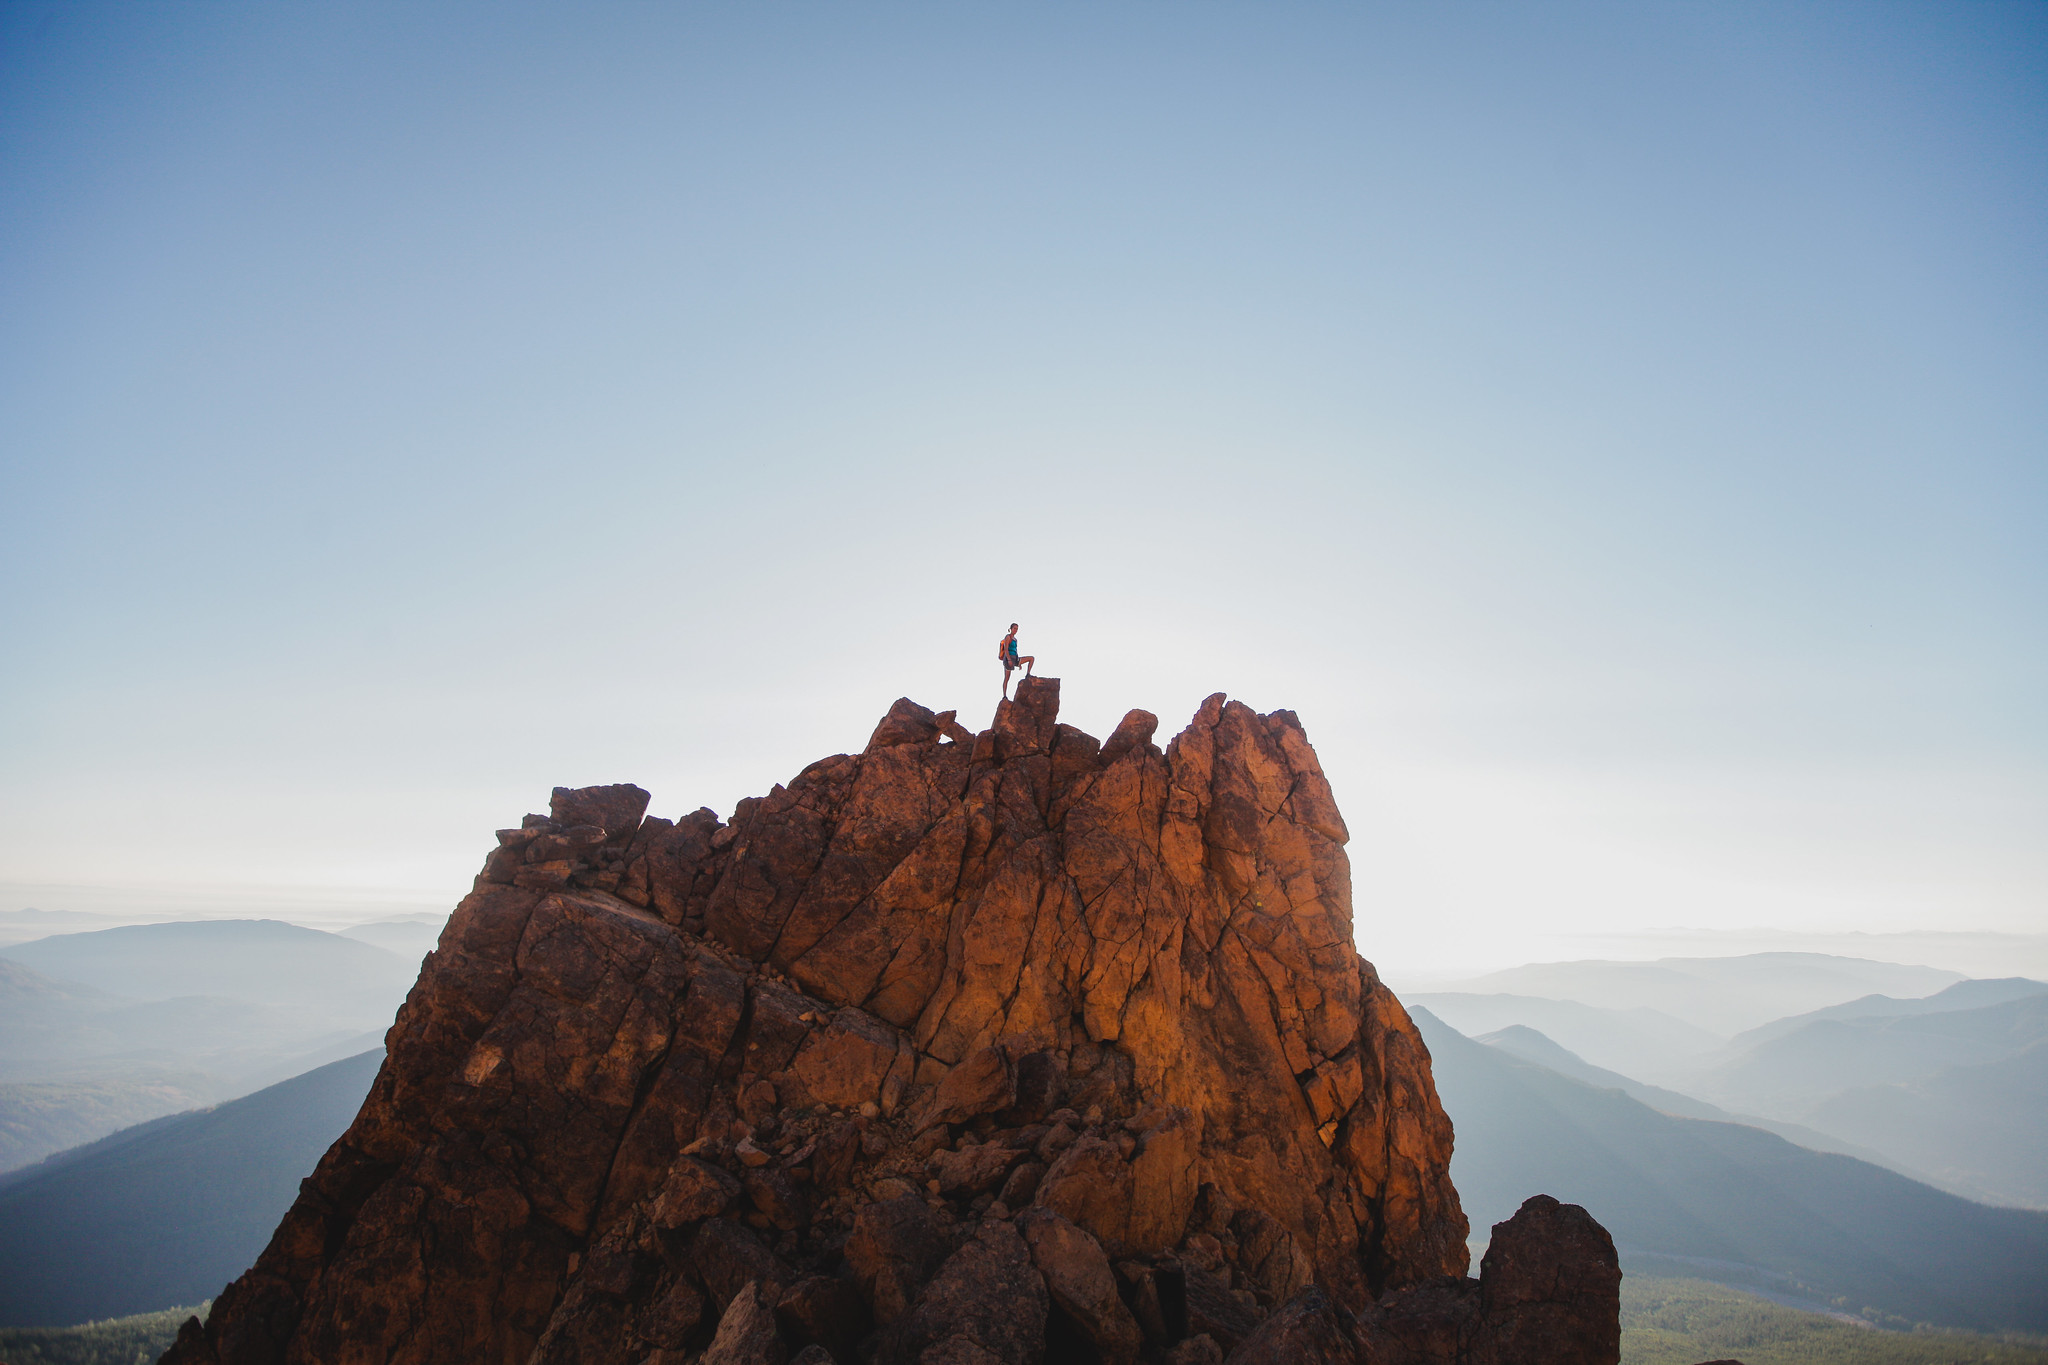 Person on the top of a tall mountain summit. In the background is an entire mountain range. The sky is clear.